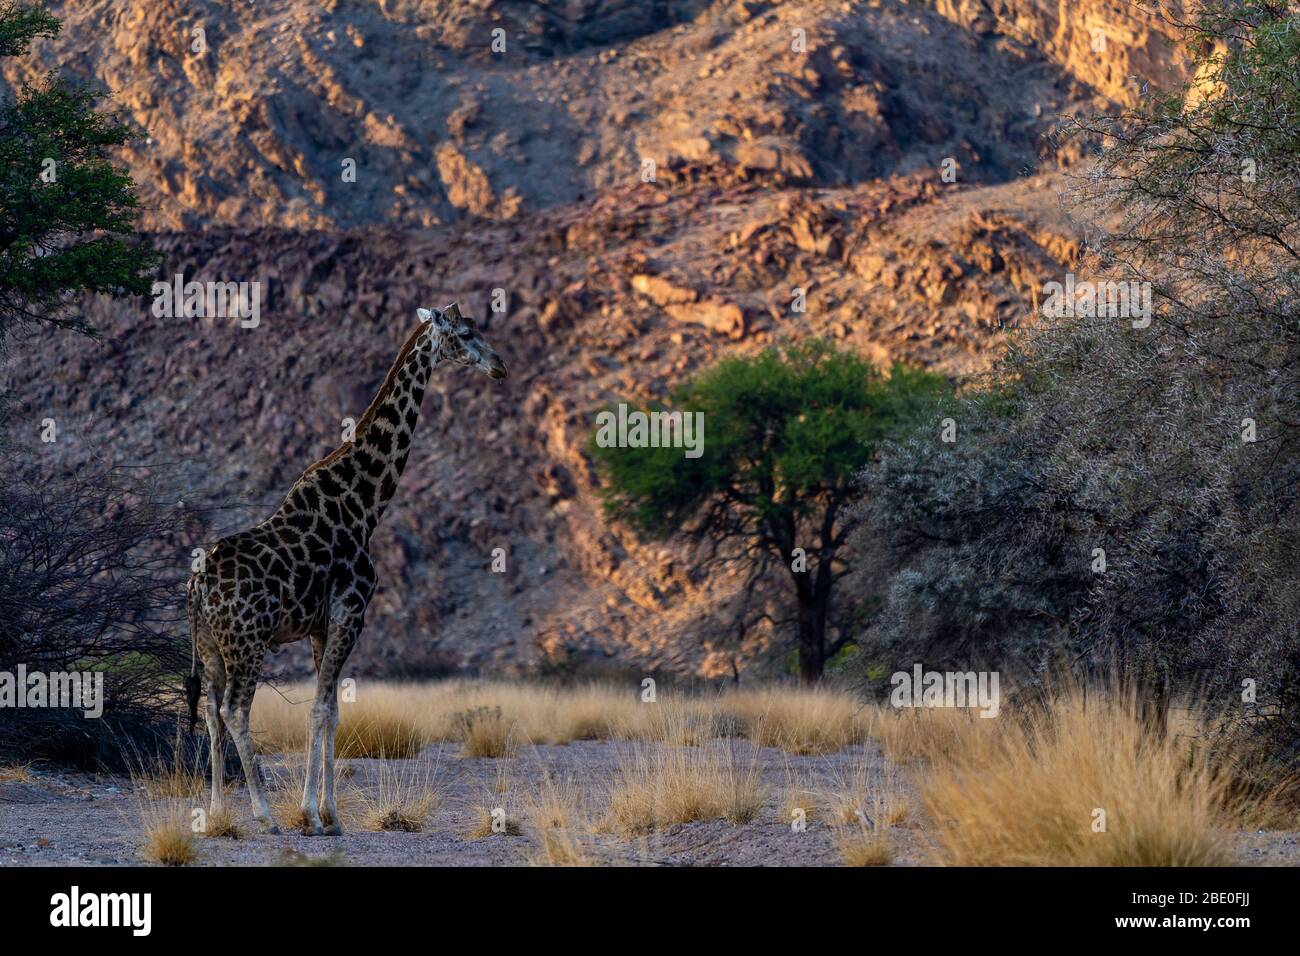 A giraffe at sunset in a canyon, in the background a rocky canyon Stock Photo